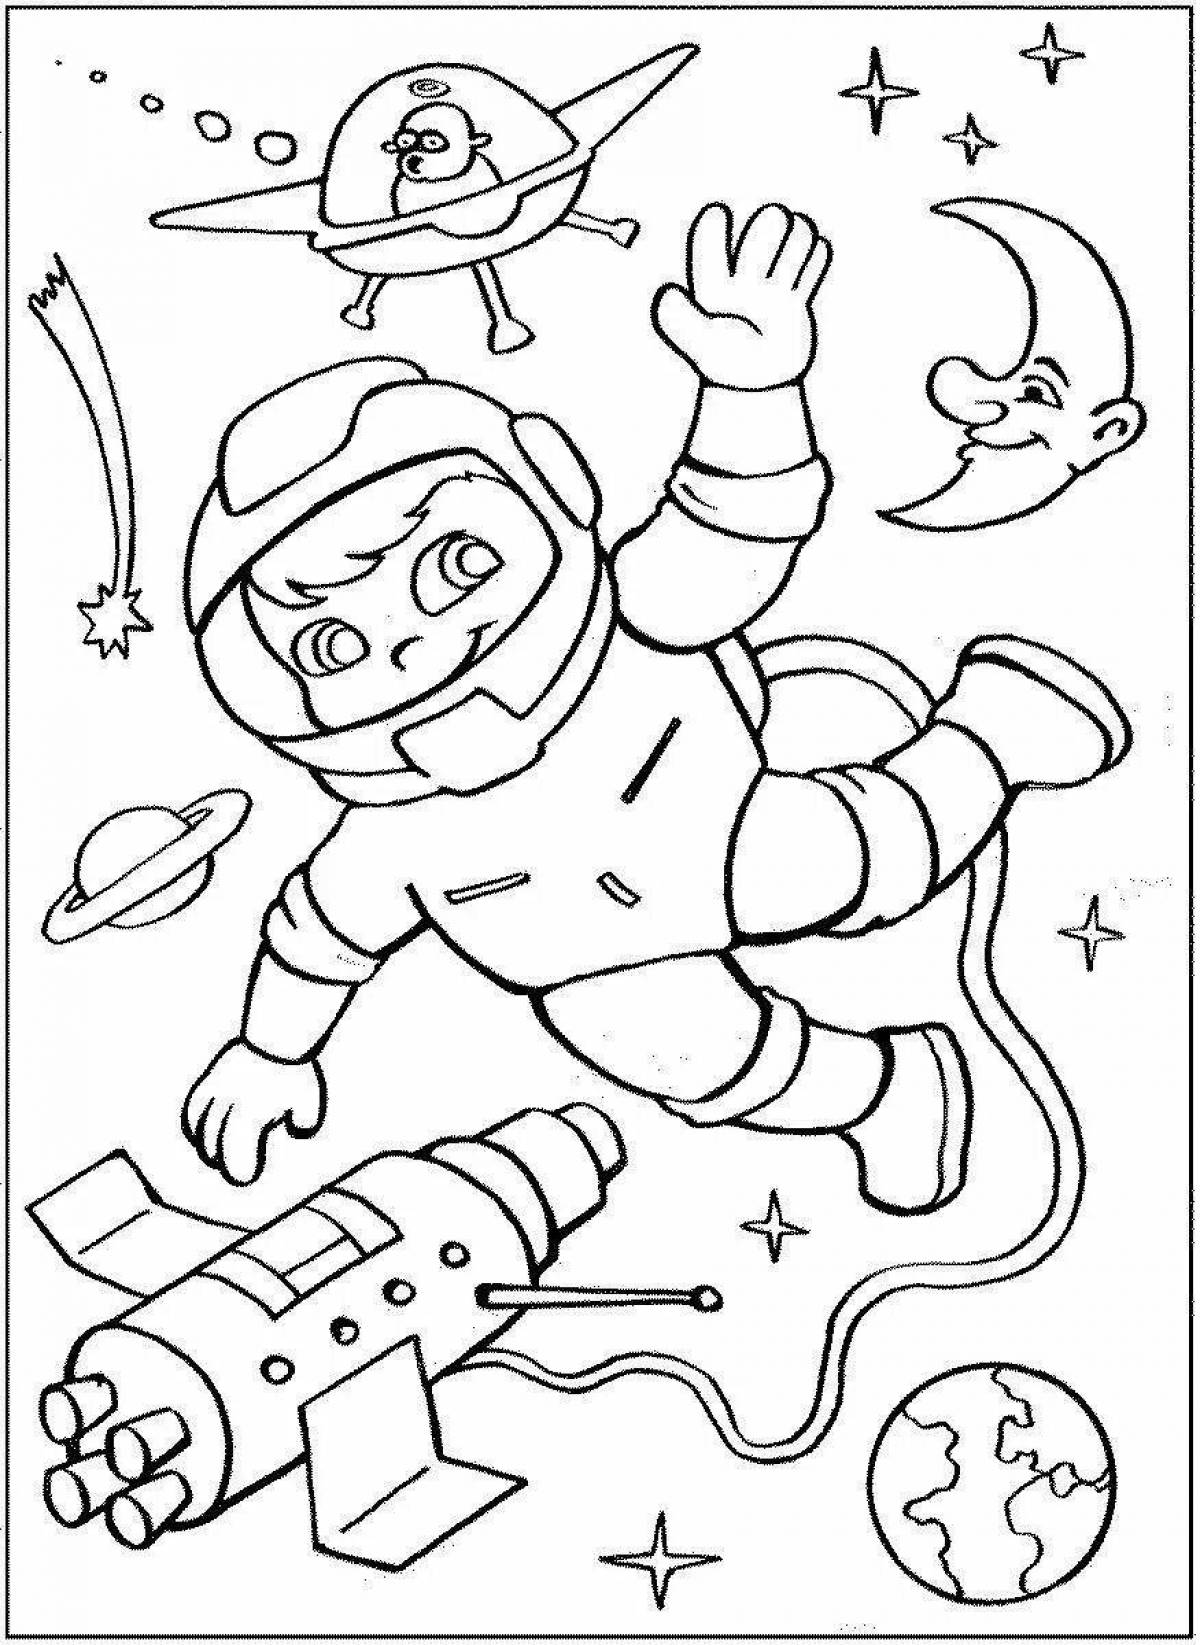 Distinguished Space Exploration coloring page